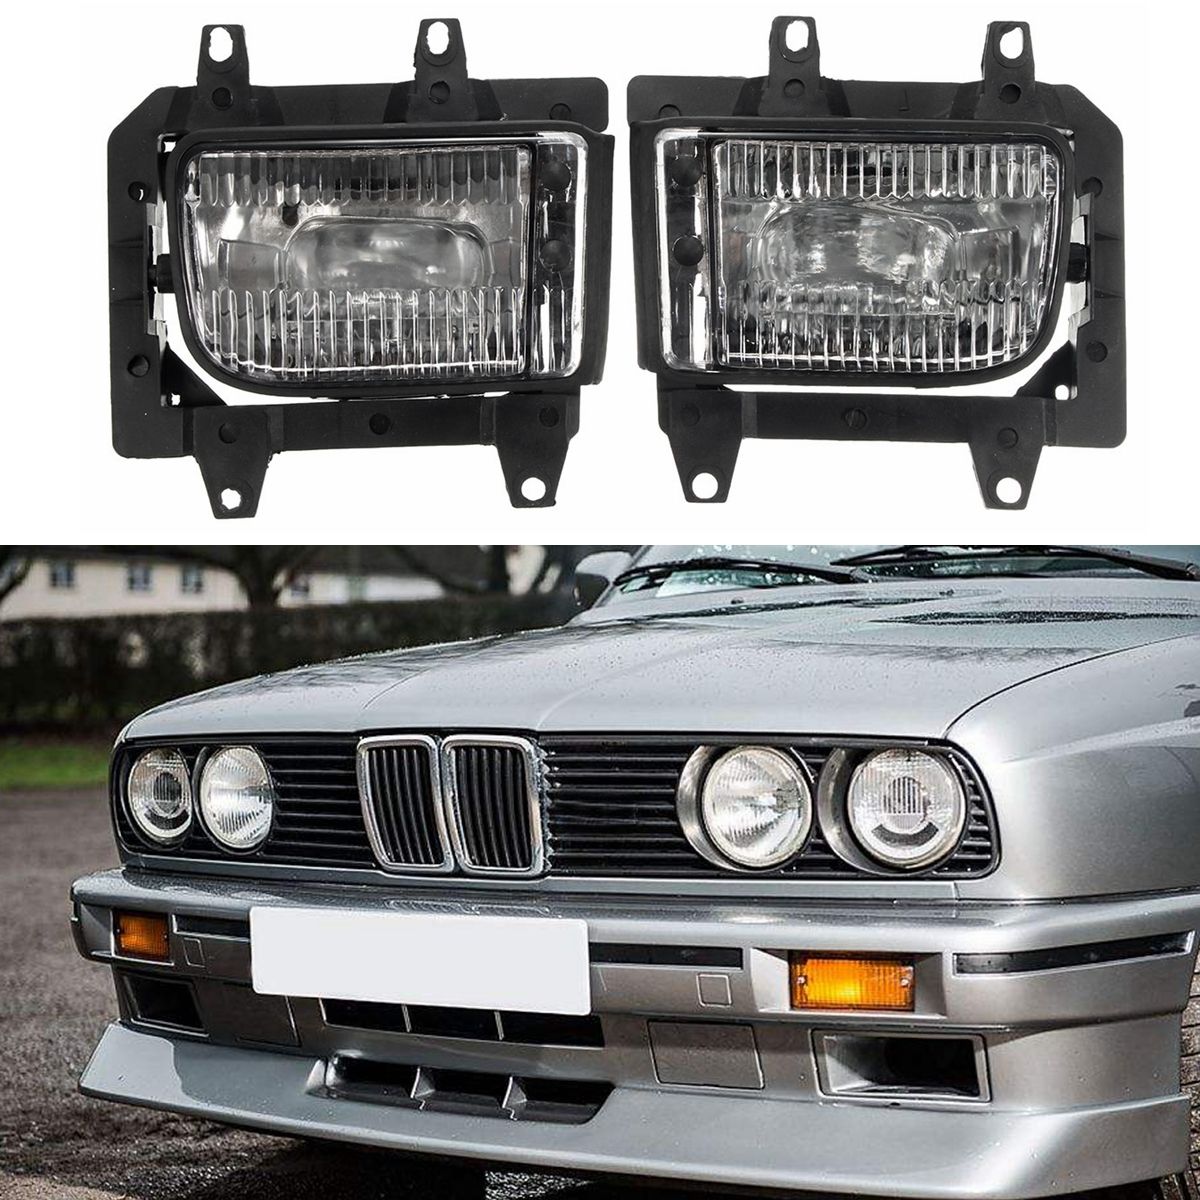 Pair-Plastic-Bumper-Front-Clear-Fog-Light-Cover-for-BMW-E30-318i-318is-325i-325is-1048059